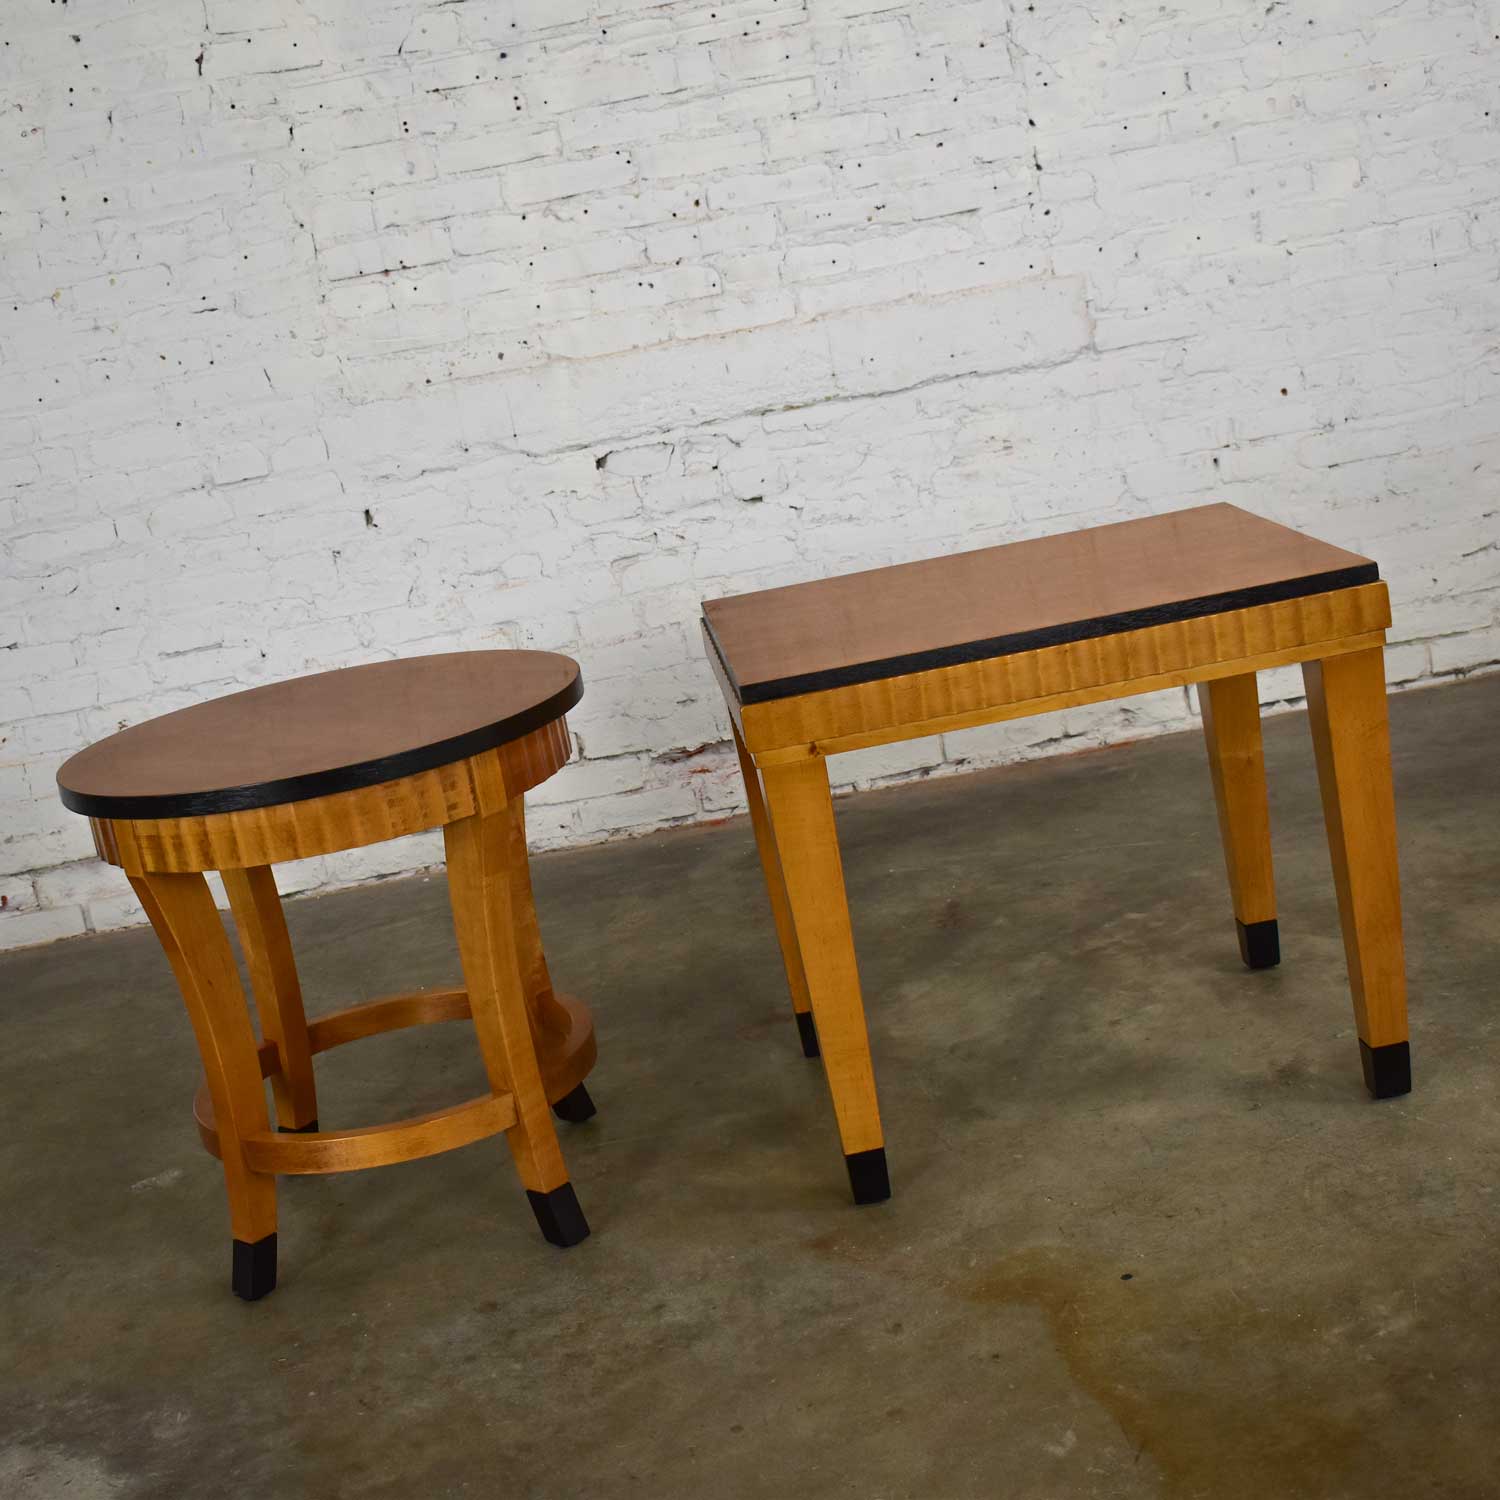 Pair Lane Art Deco Revival End Tables Mid-Toned Wood with Black Accents 1 Rectangle 1 Round